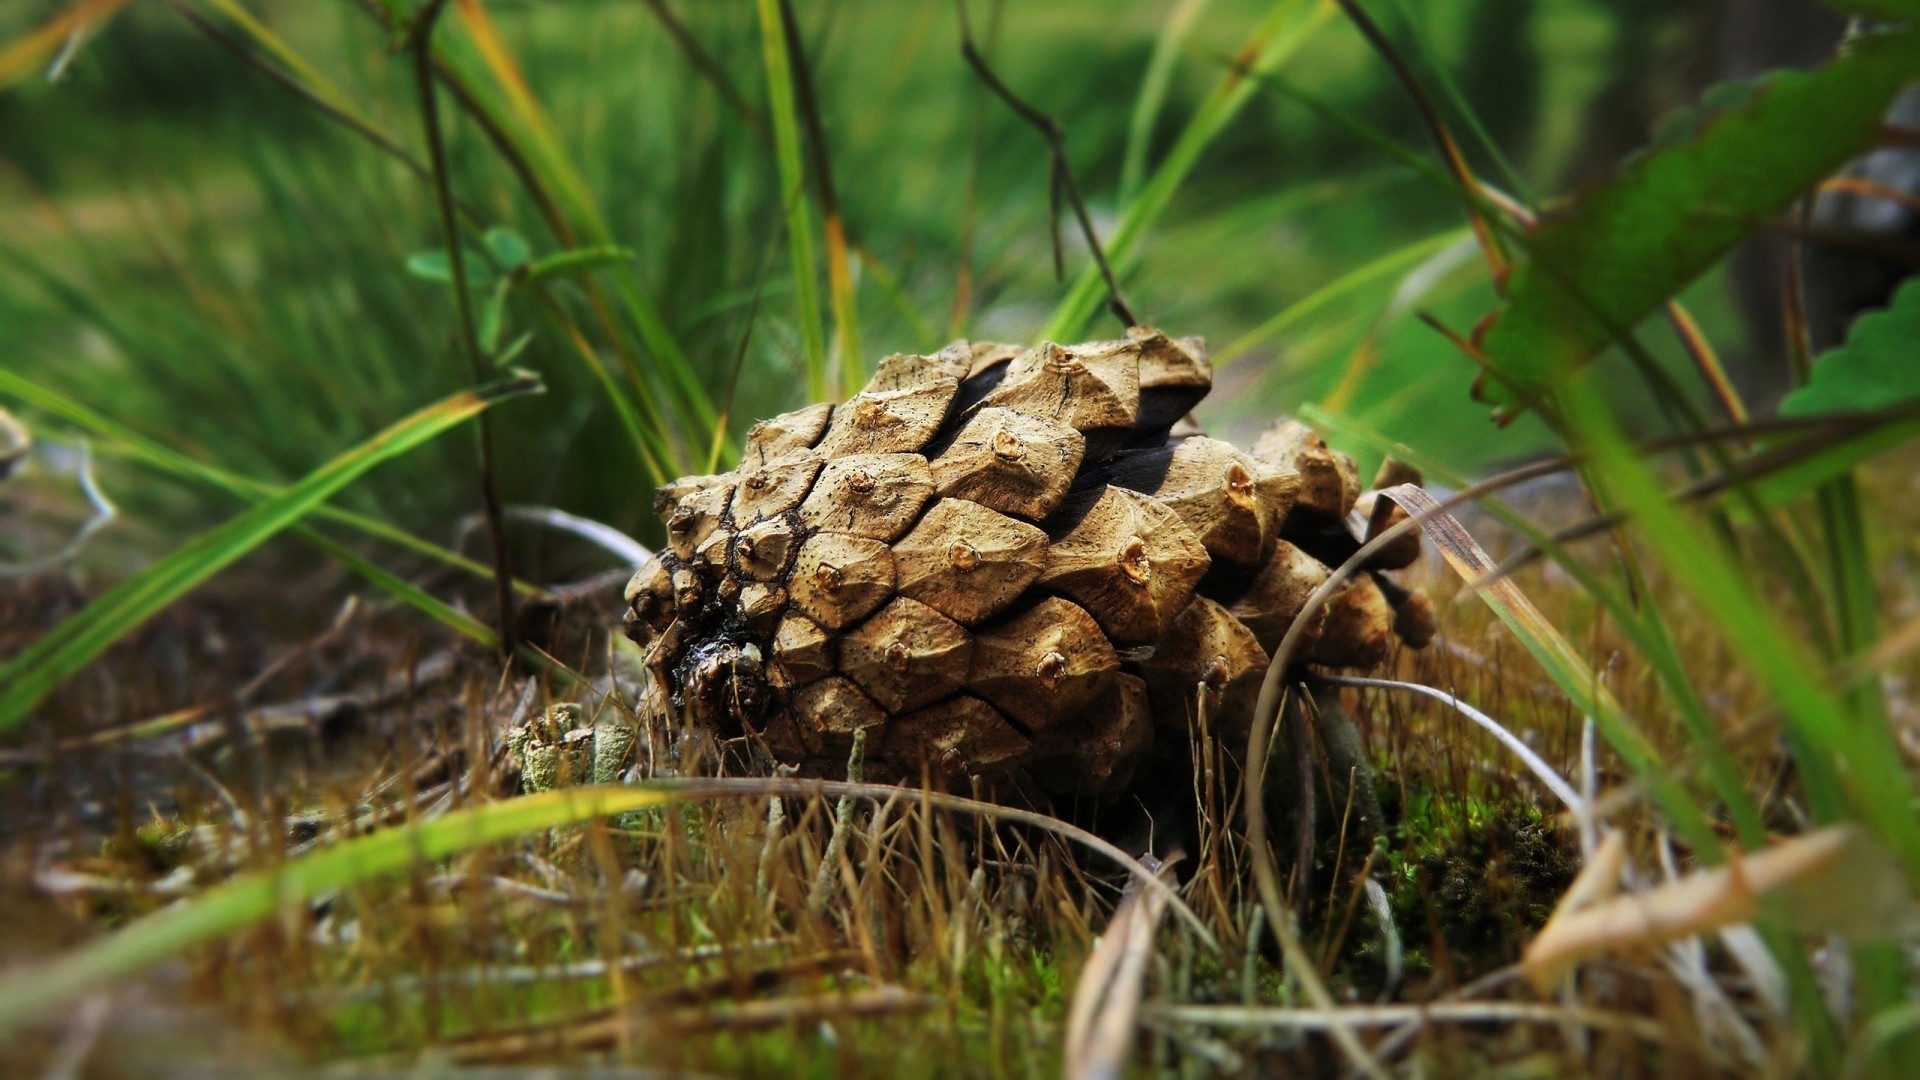 General 1920x1080 nature grass cones pine cones ground depth of field leaves plants outdoors